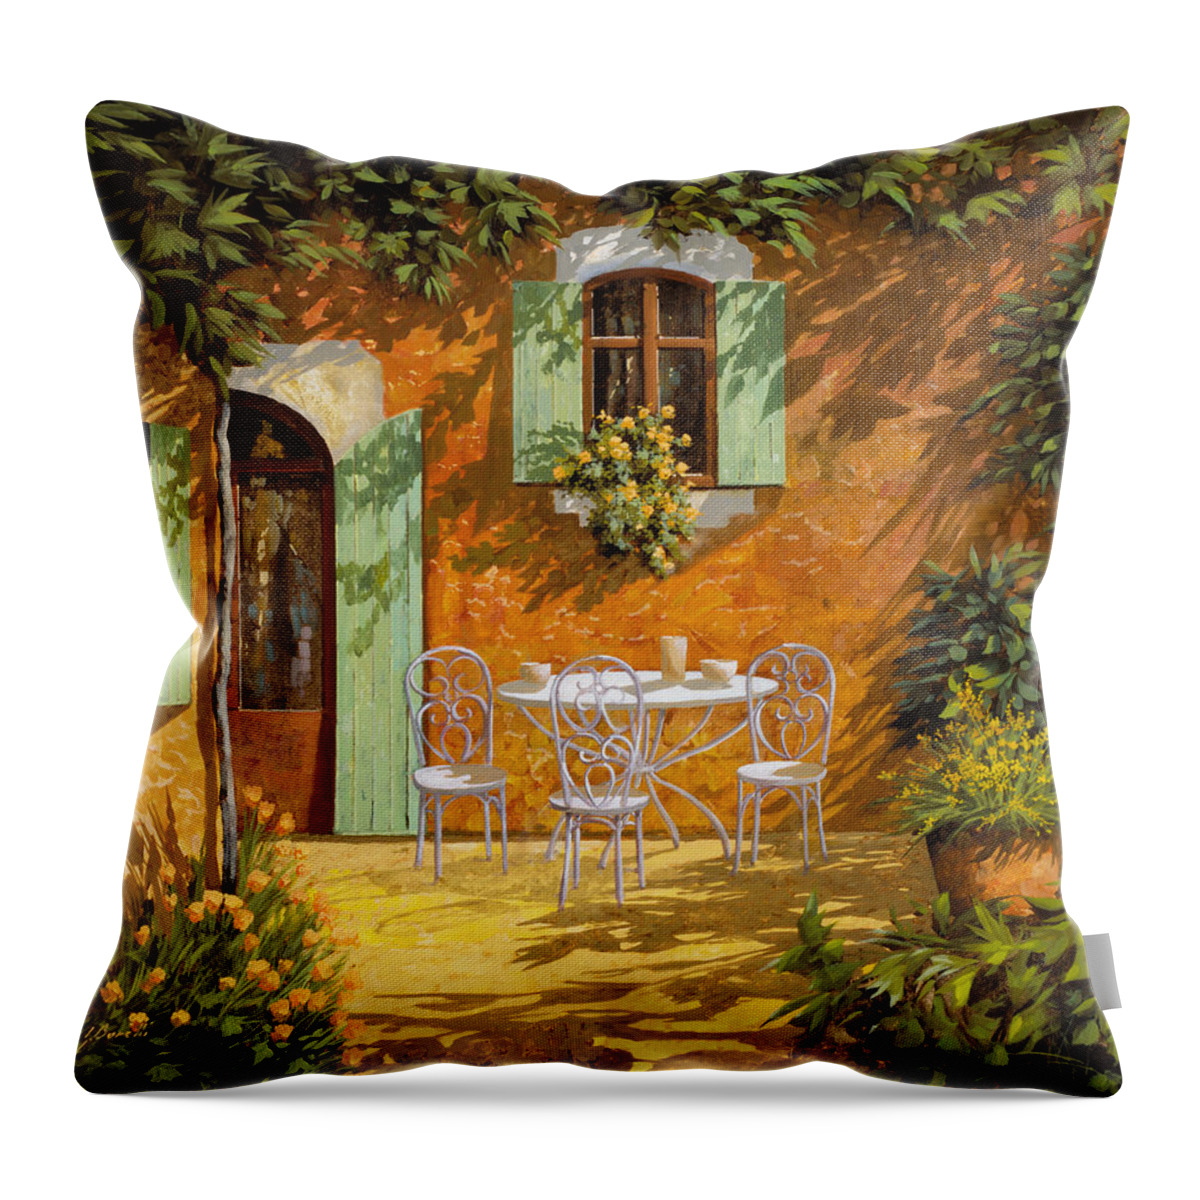 Quiete Throw Pillow featuring the painting Sul Patio by Guido Borelli